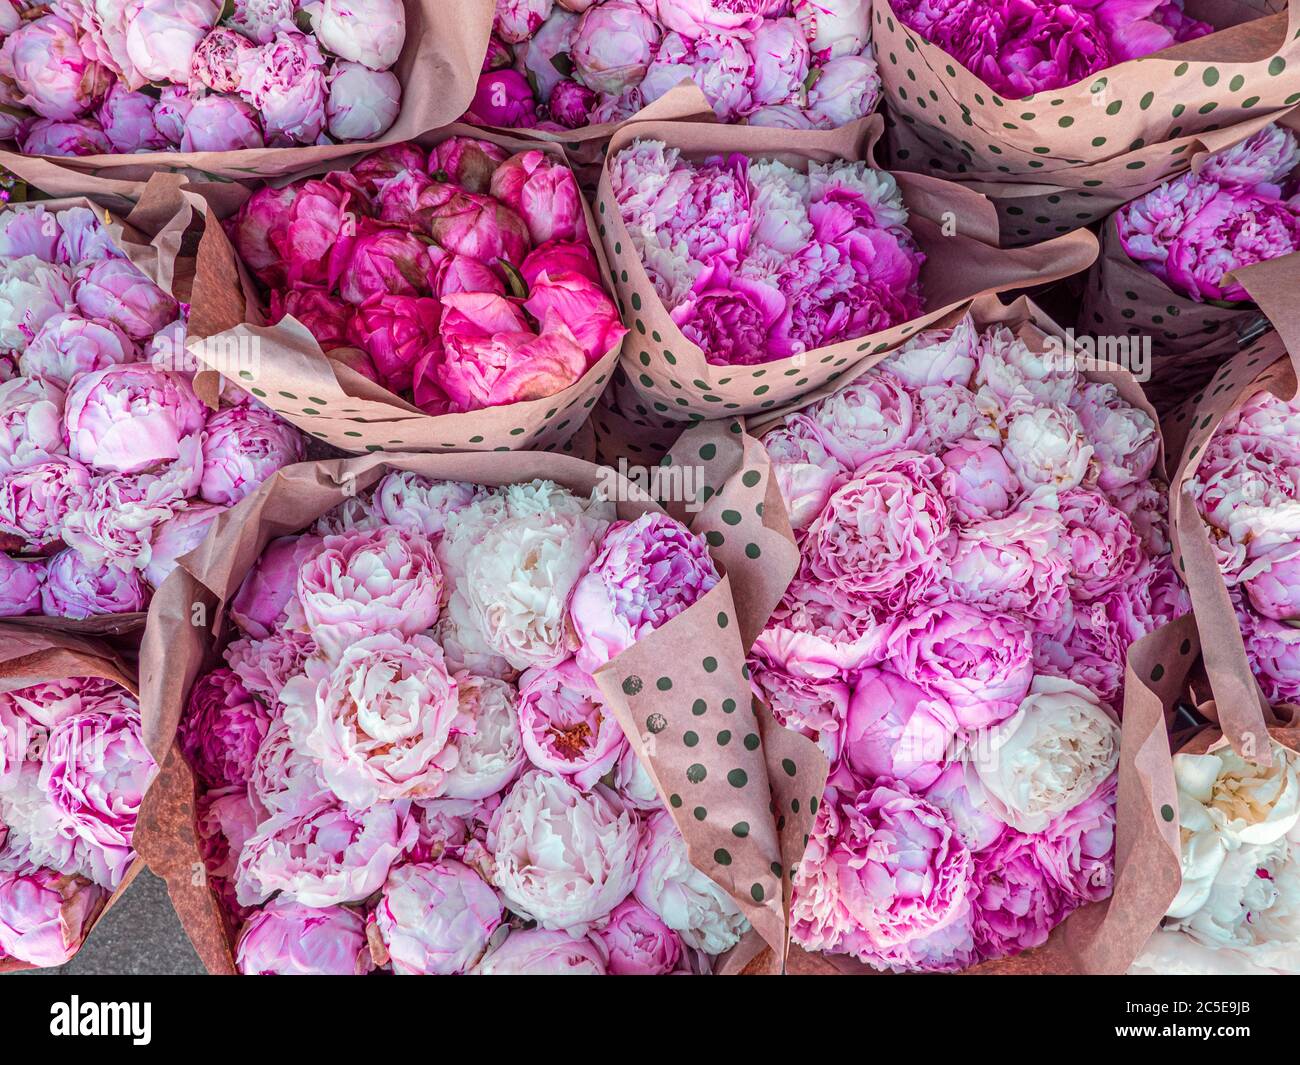 Bouquets of pink and white peonies. Bouquets of peony flowers on the farmers market. Stock Photo